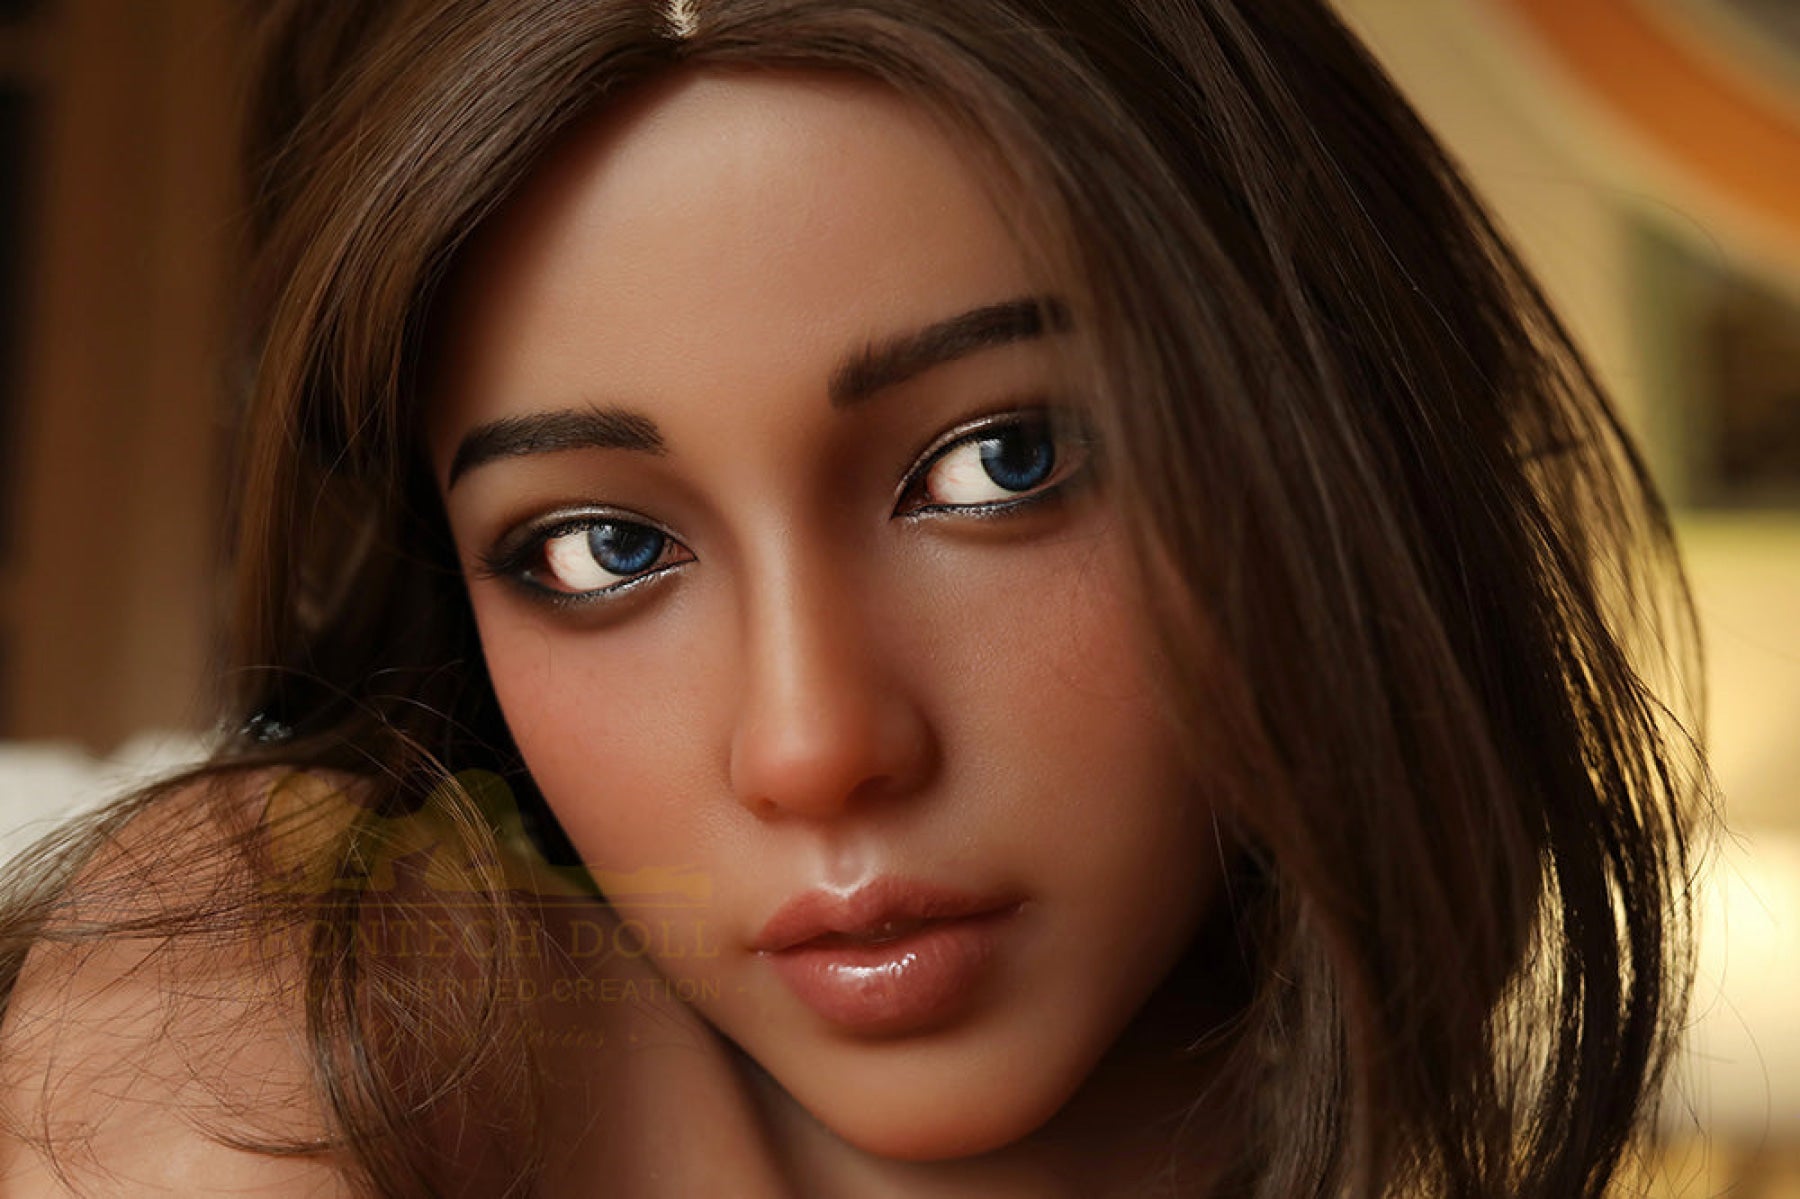 Lexi Silicone Head and TPE Body Hybrid Sex Doll - Irontech Doll Irontech Doll